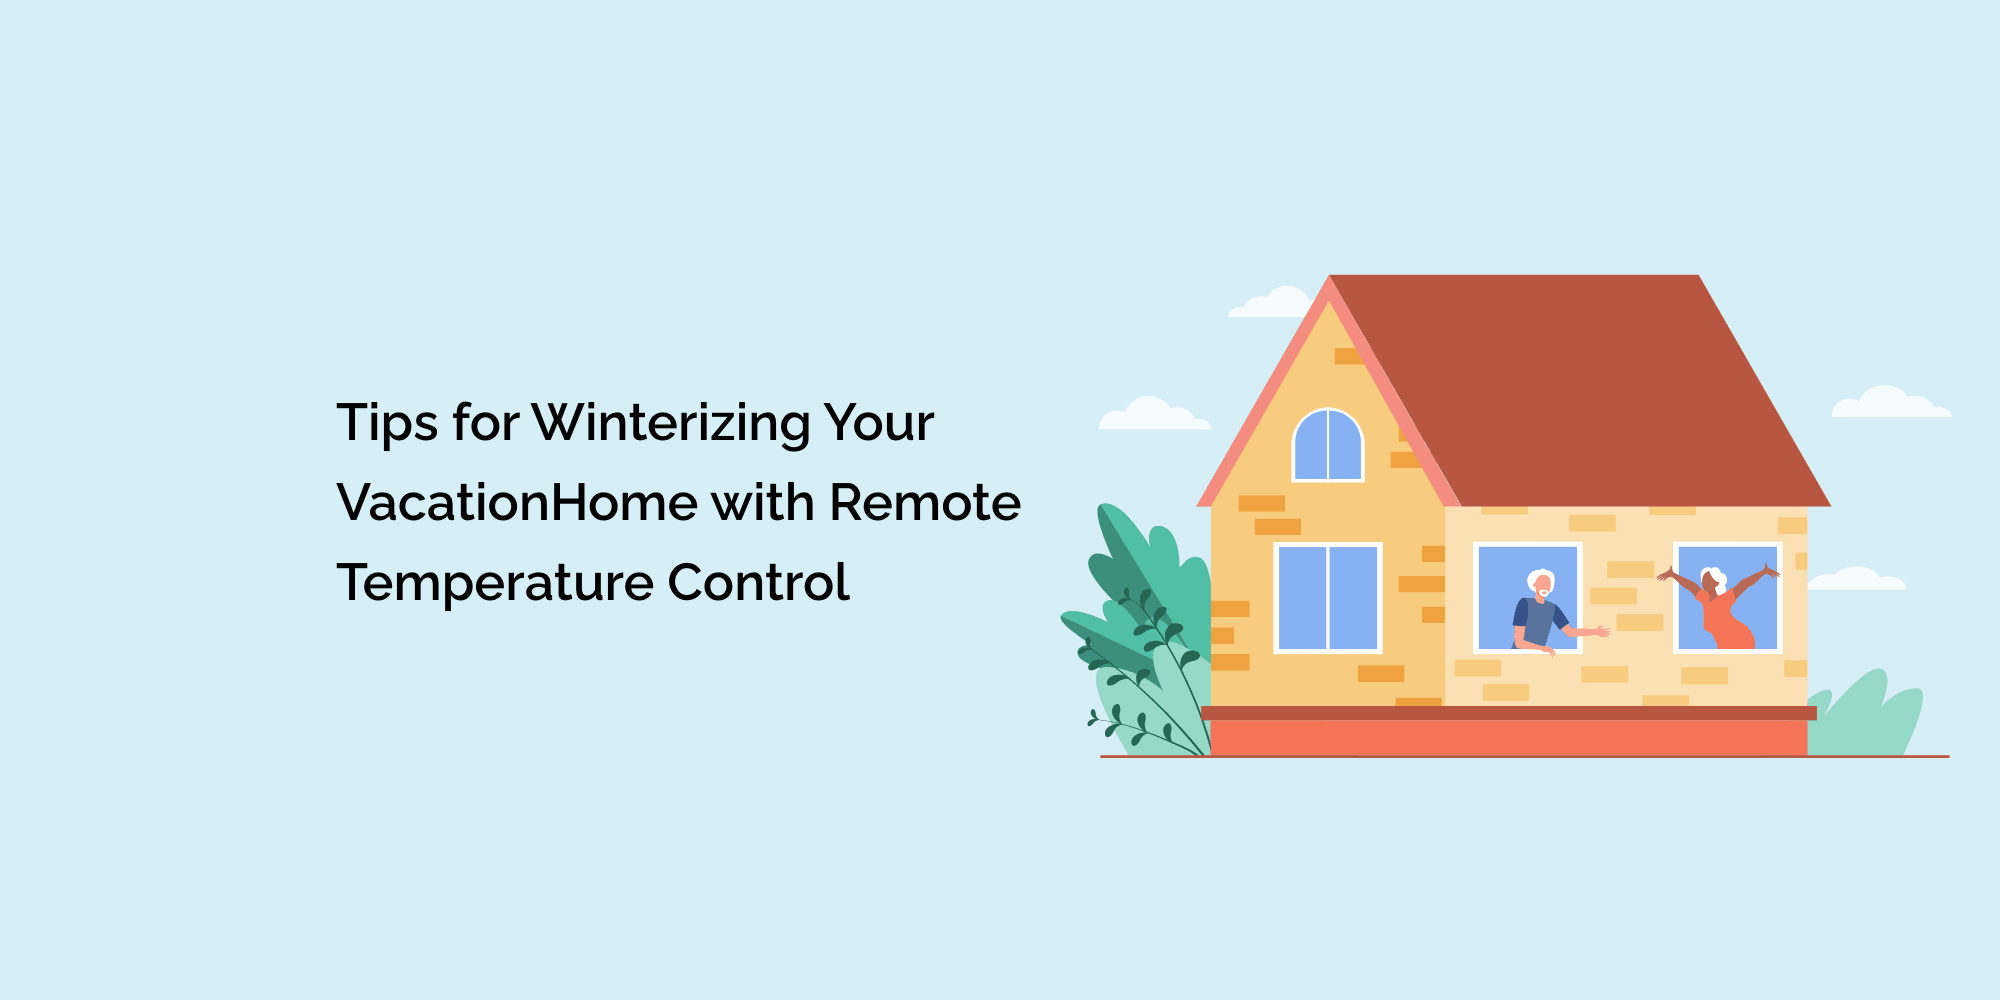 Tips for Winterizing Your Vacation Home with Remote Temperature Control